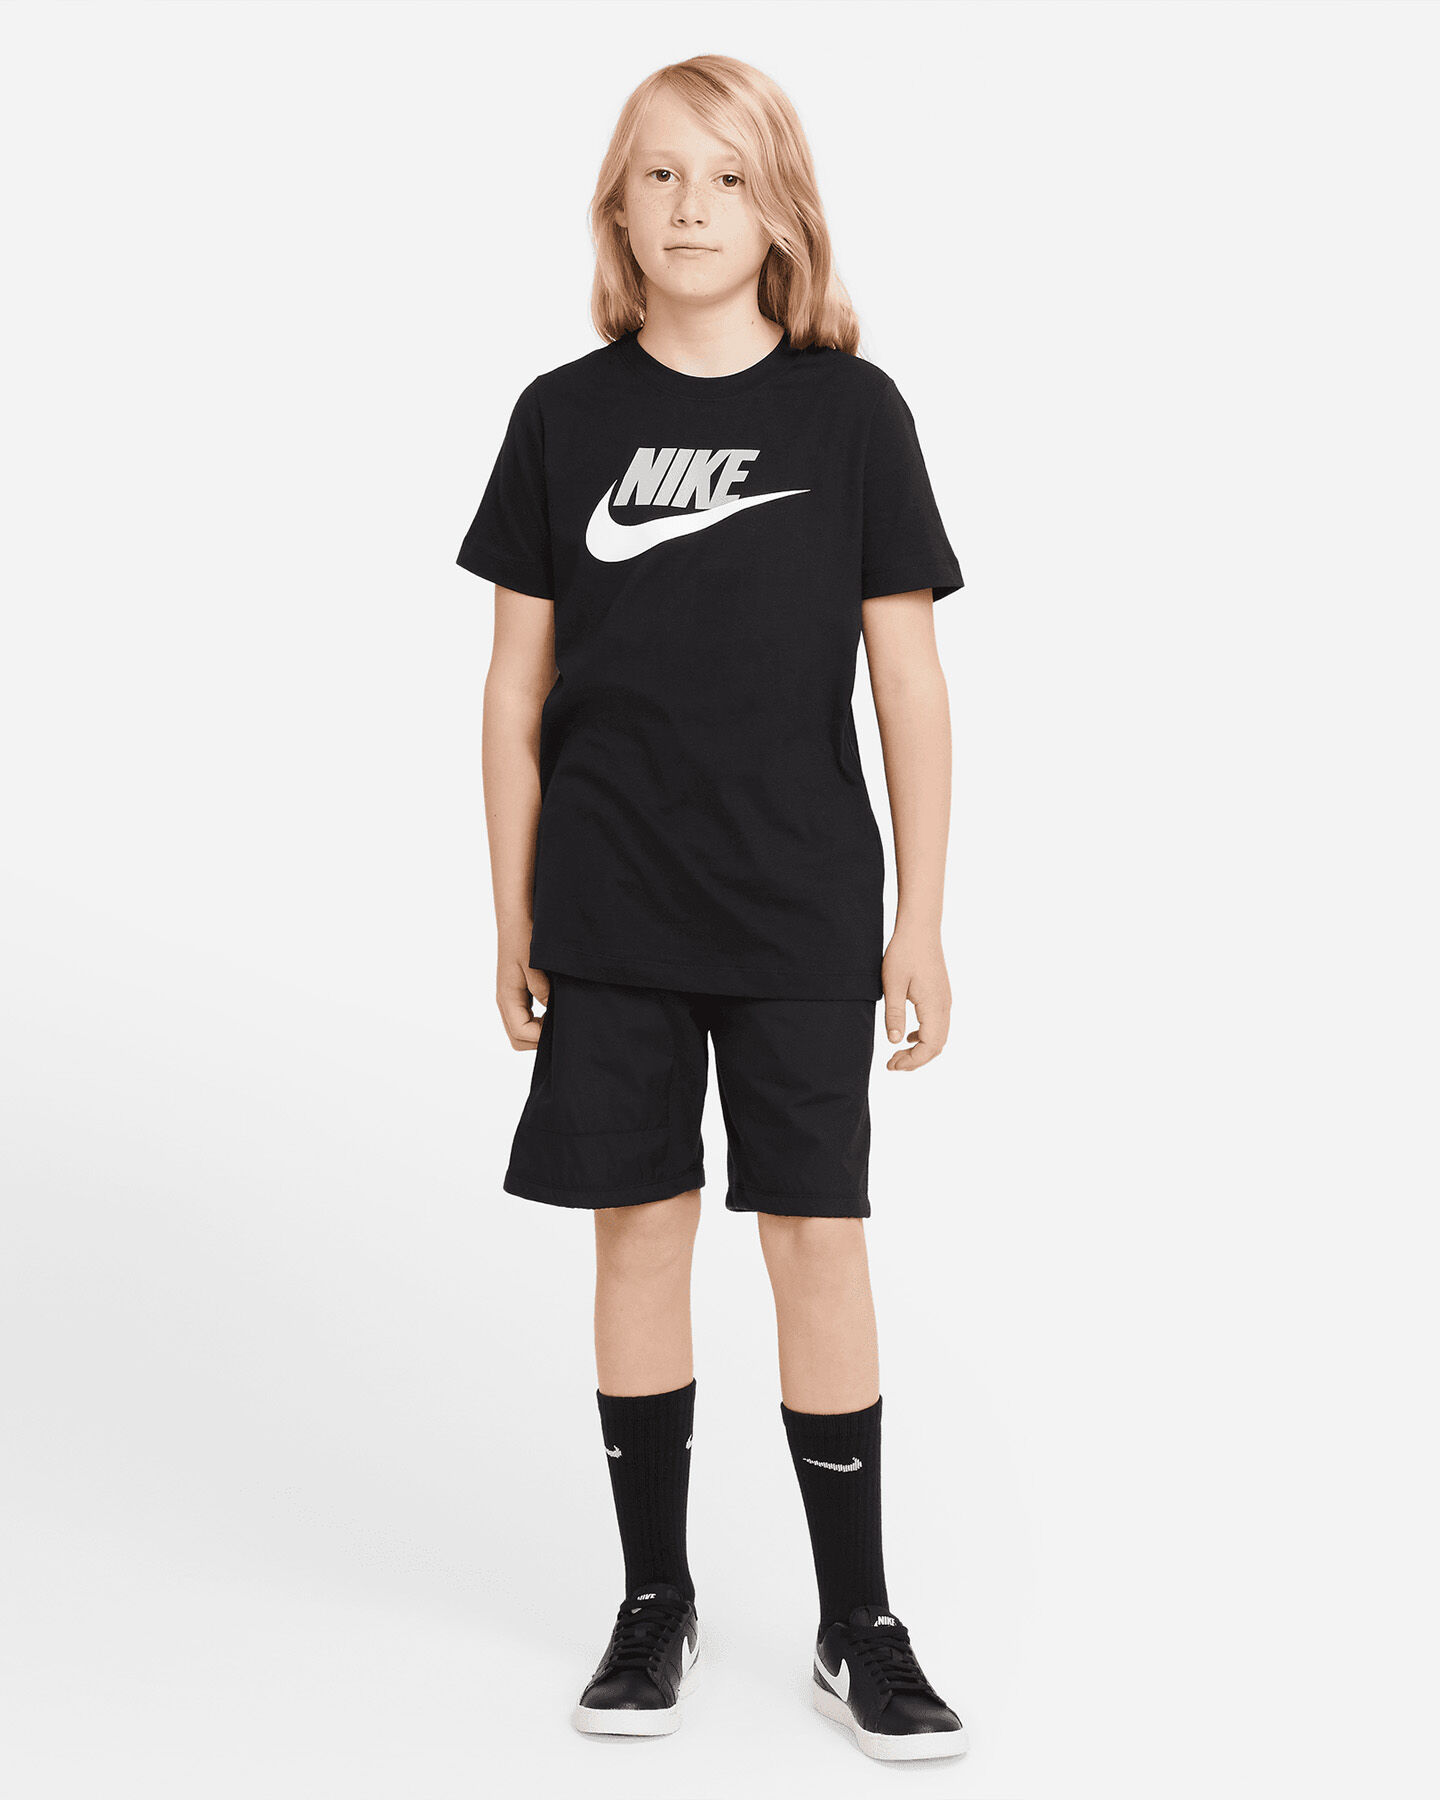  T-Shirt NIKE CLOS ANGELESSSIC JR S5162700|013|S scatto 5